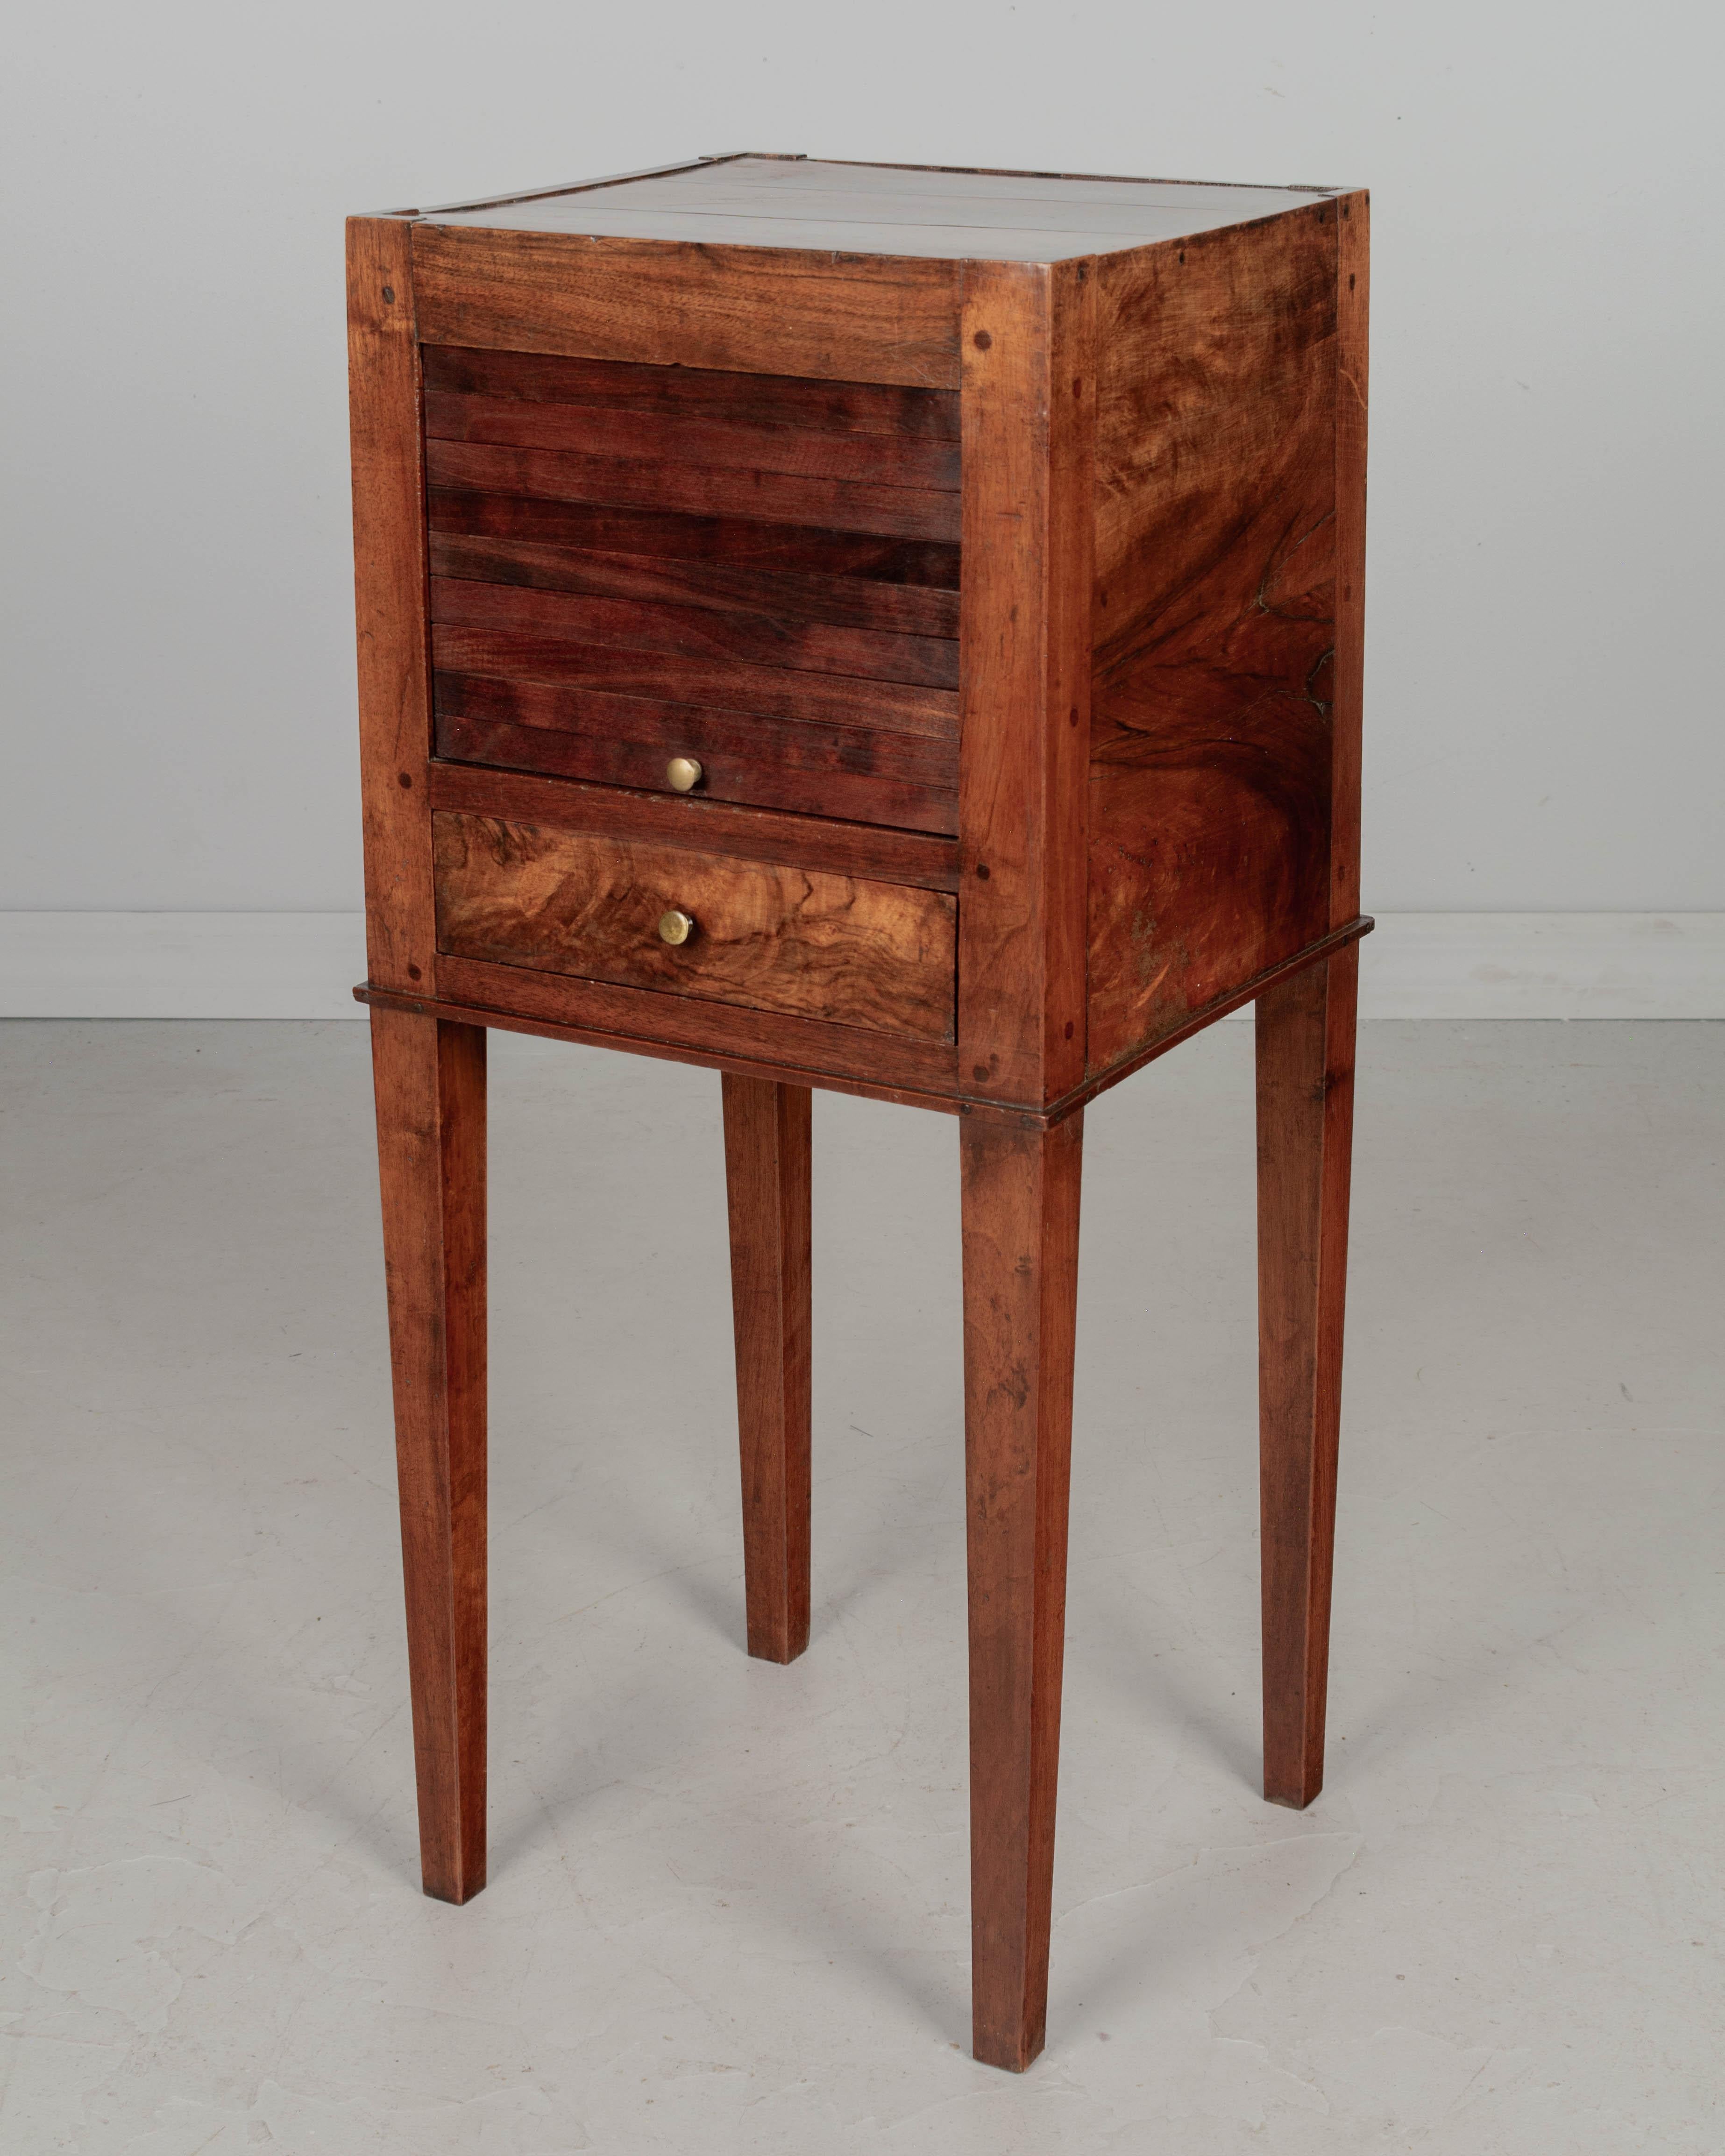 A 19th Century French walnut side table with a vertical tambour door and dovetailed drawer with brass knob. Finished on all four sides. Slender tapered legs. Nice choice of wood with beautiful grain, bookmatched sides. Waxed patina. Pegged